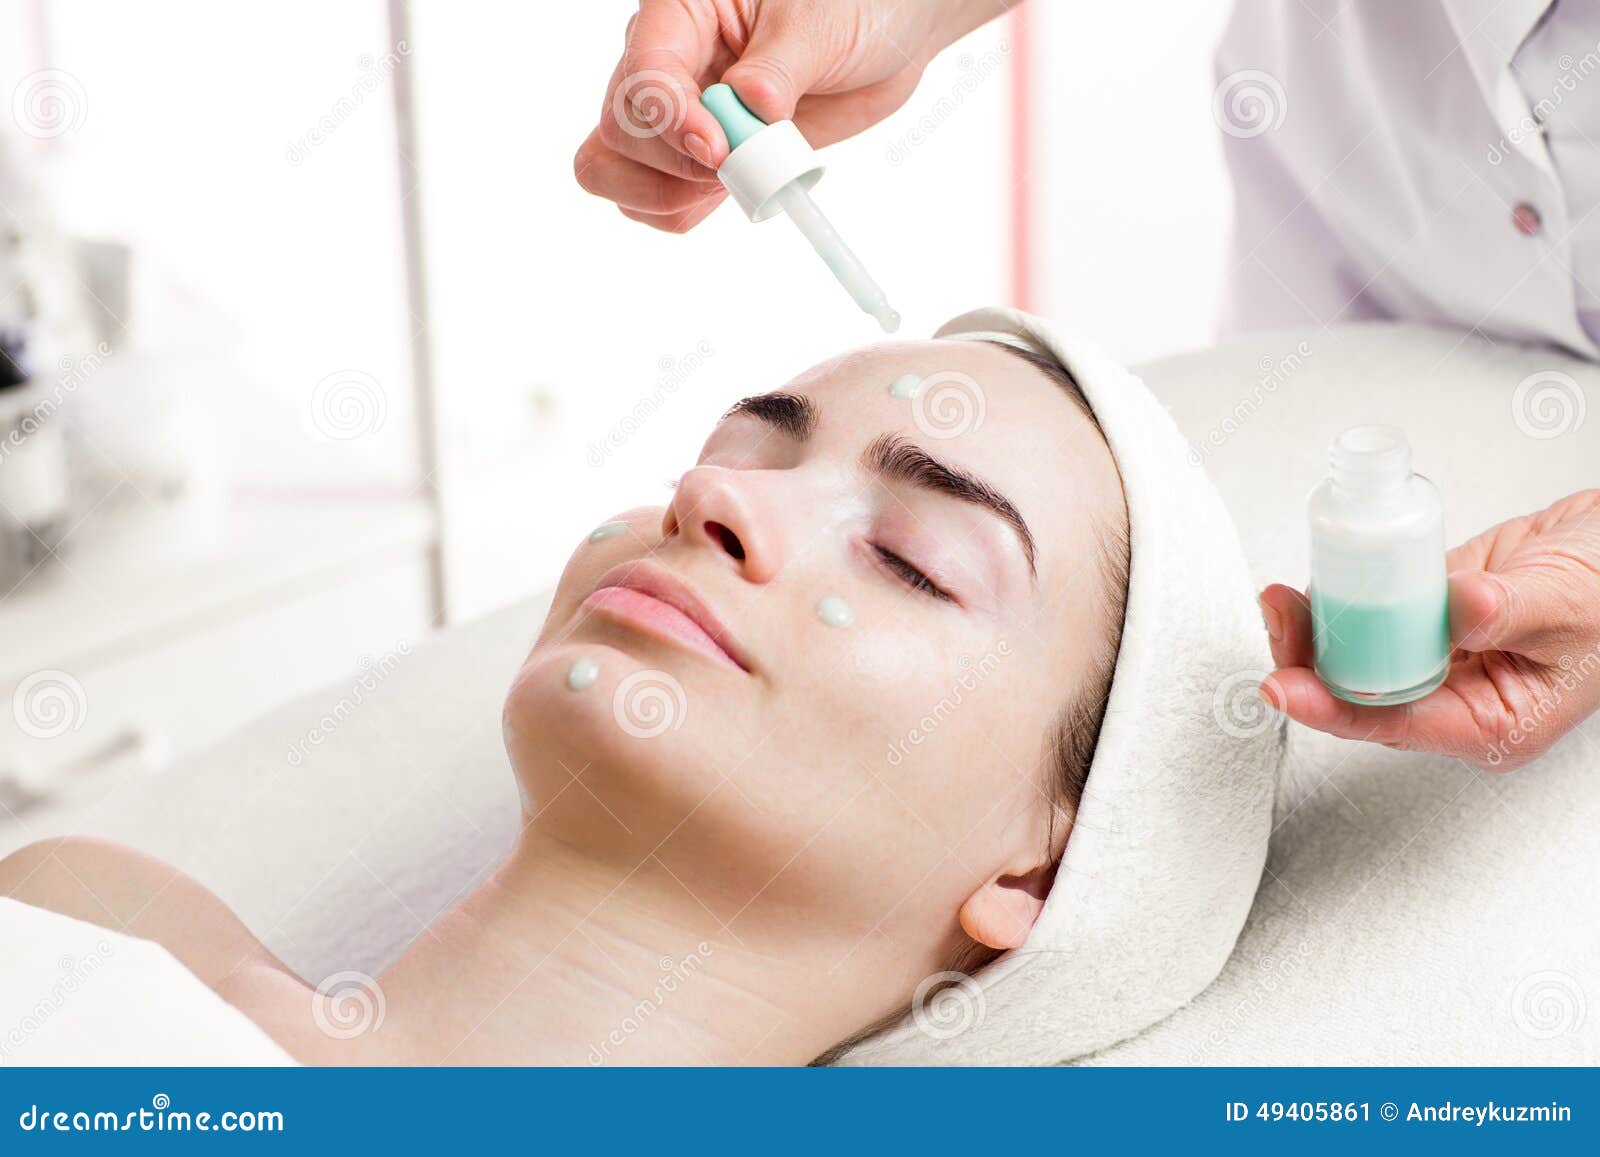 serum facial treatment of young woman in spa salon